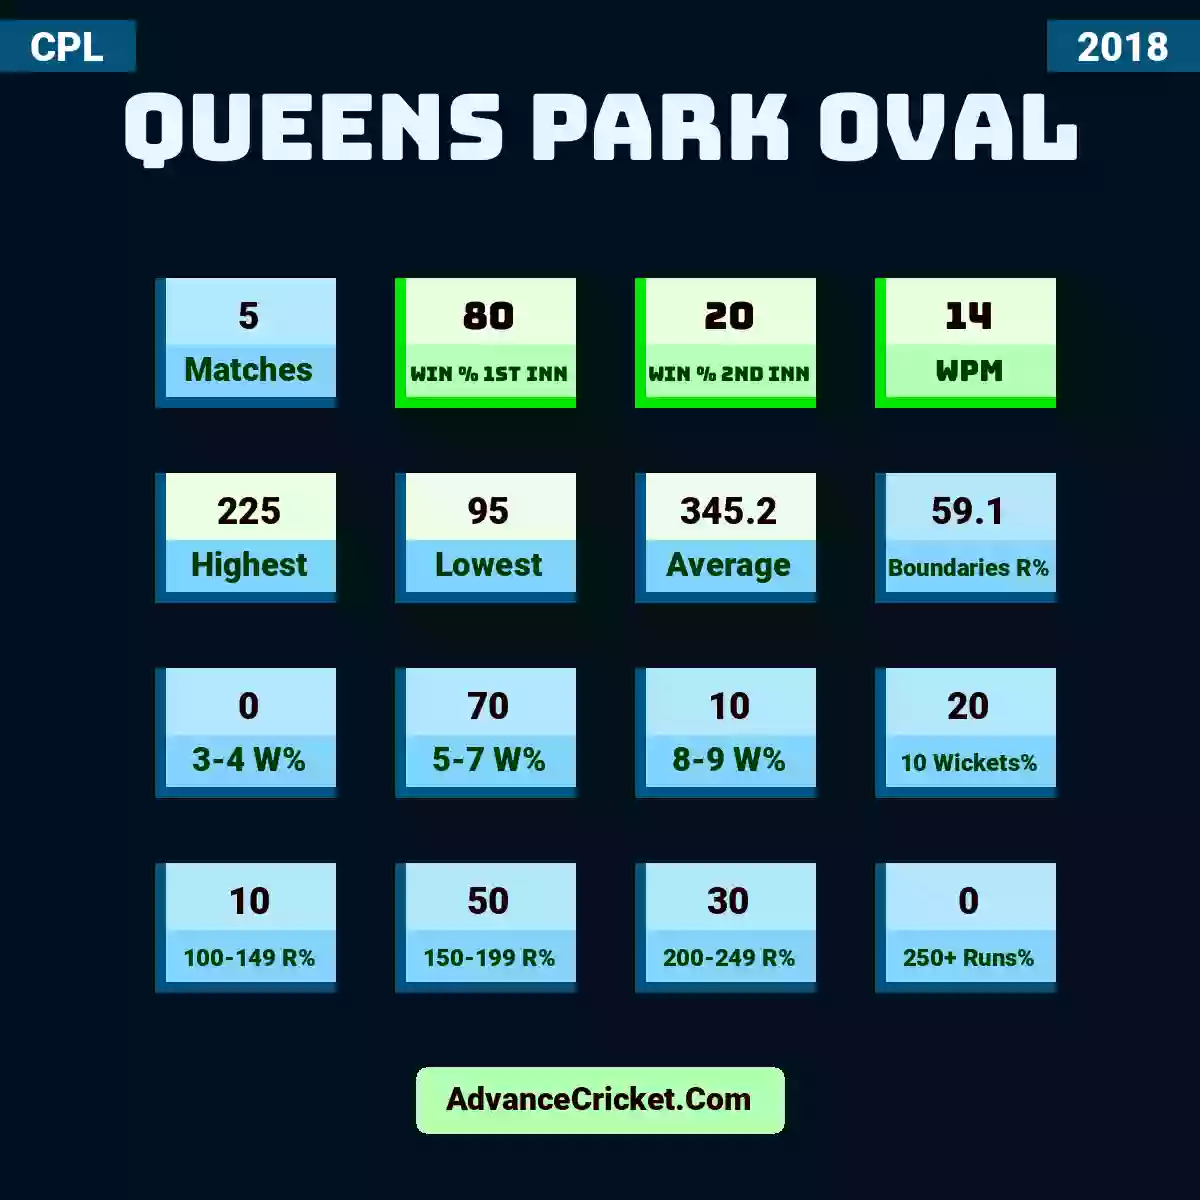 Image showing Queens Park Oval with Matches: 5, Win % 1st Inn: 80, Win % 2nd Inn: 20, WPM: 14, Highest: 225, Lowest: 95, Average: 345.2, Boundaries R%: 59.1, 3-4 W%: 0, 5-7 W%: 70, 8-9 W%: 10, 10 Wickets%: 20, 100-149 R%: 10, 150-199 R%: 50, 200-249 R%: 30, 250+ Runs%: 0.